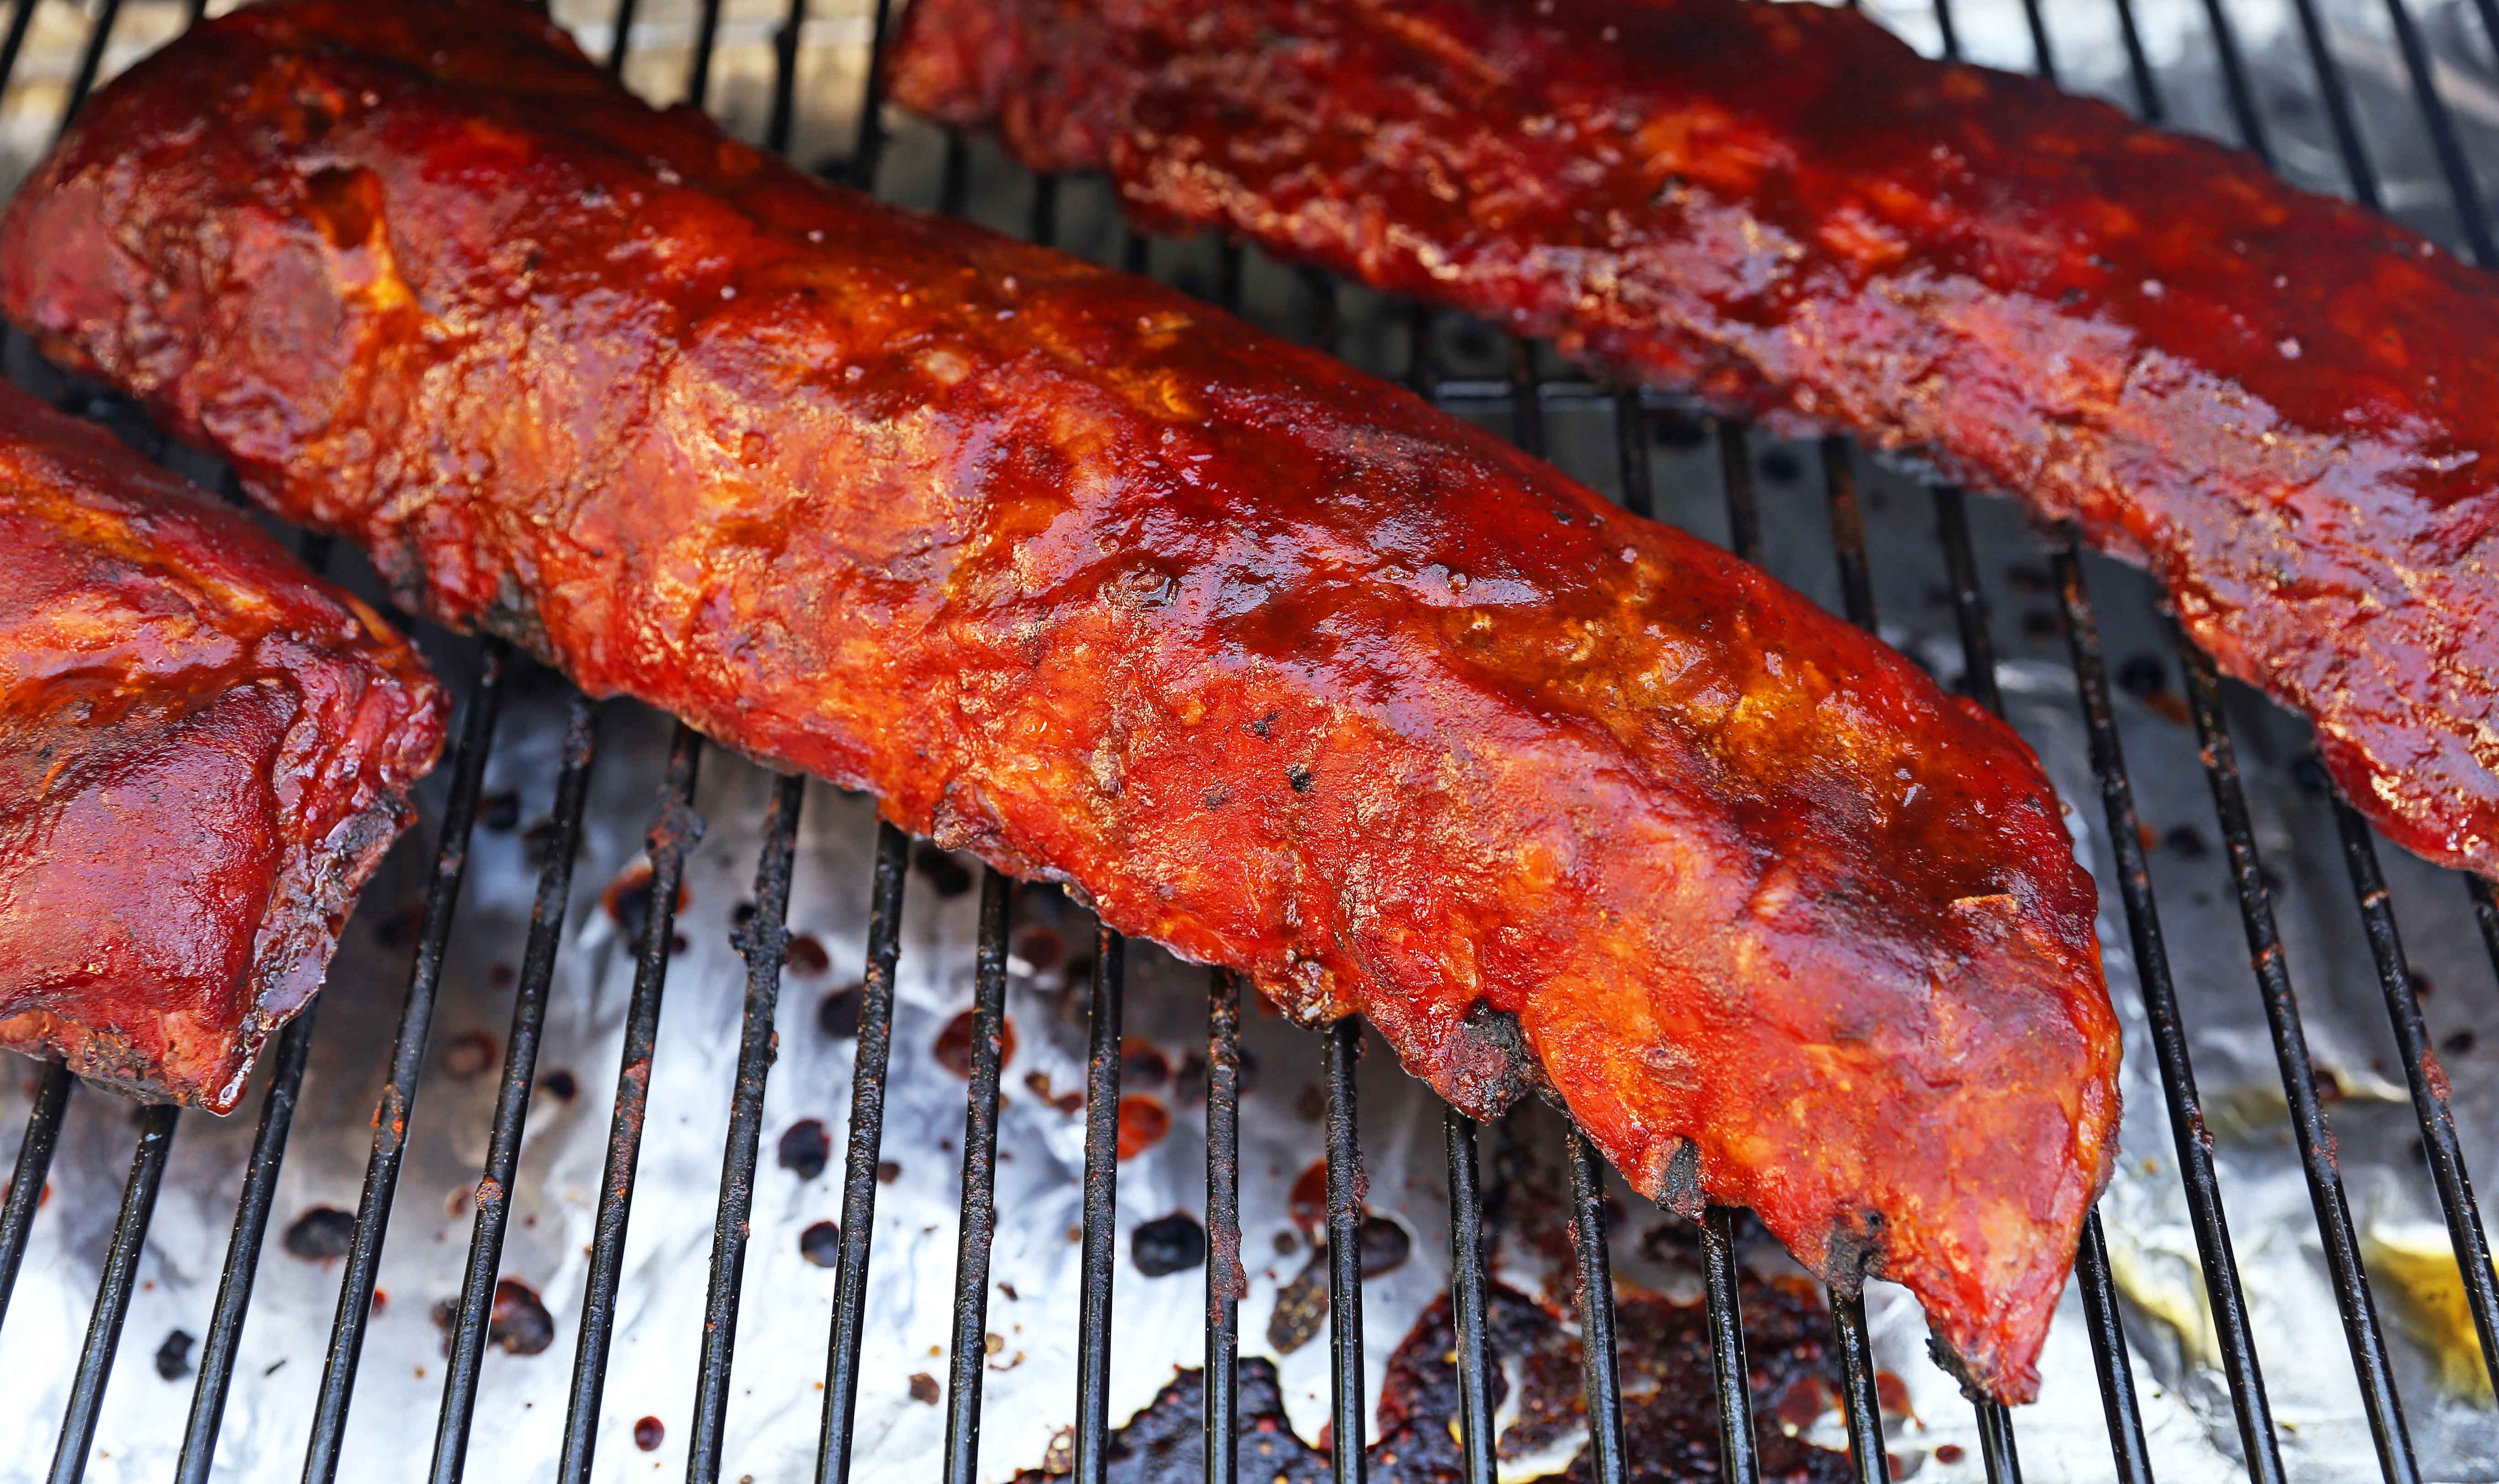 Traeger Grill. Smoked Baby Back Ribs. Tender, flavorful, fall-off-the-bone Pork Baby Back Ribs. How to smoke ribs or cook in the oven. Perfect BBQ Rub Recipe. #ribs #babybackribs